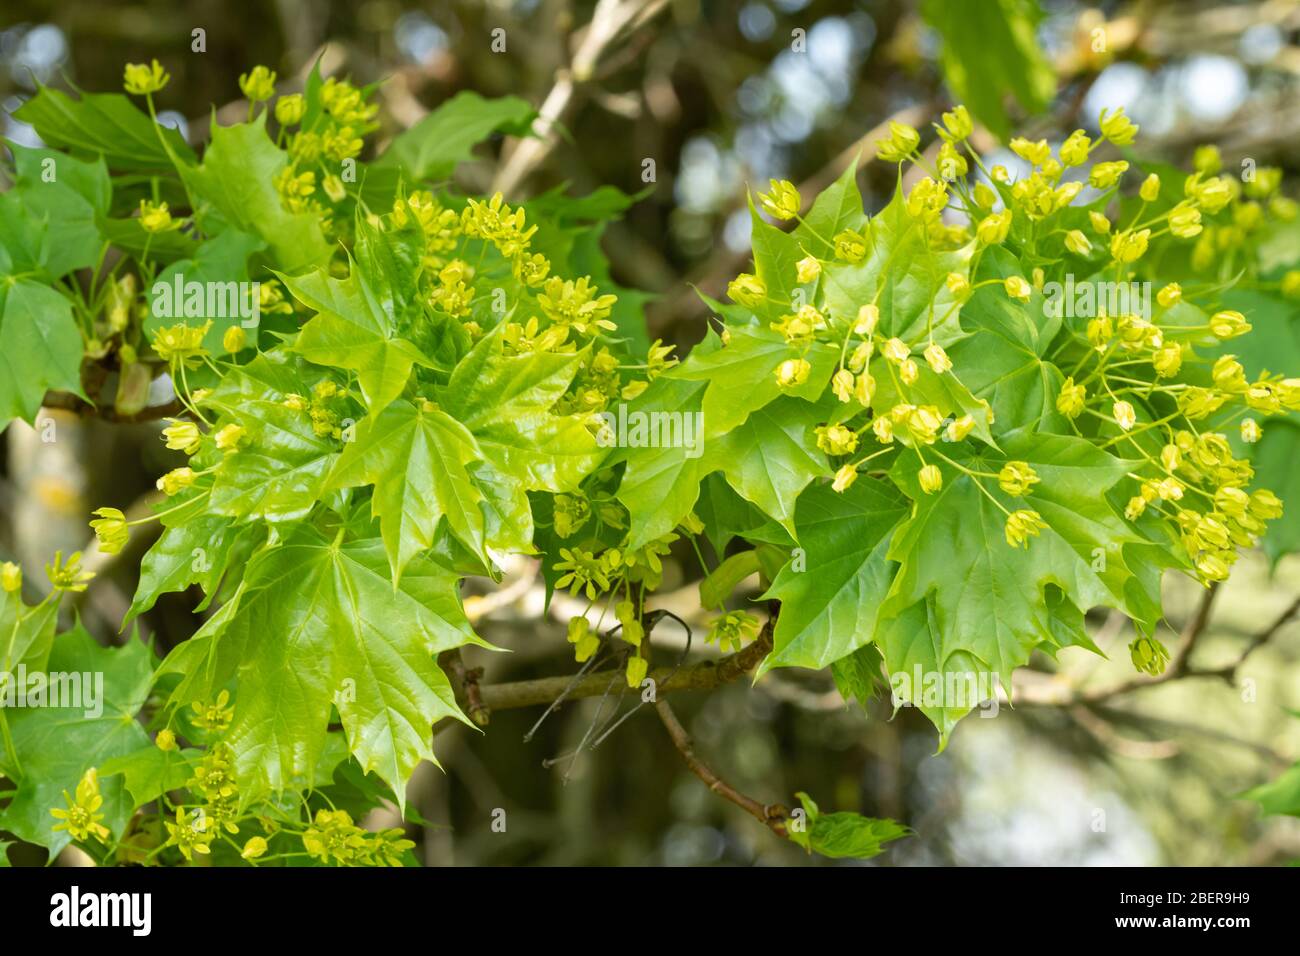 Norway maple tree (Acer platanoides) with flowers in April, UK Stock Photo